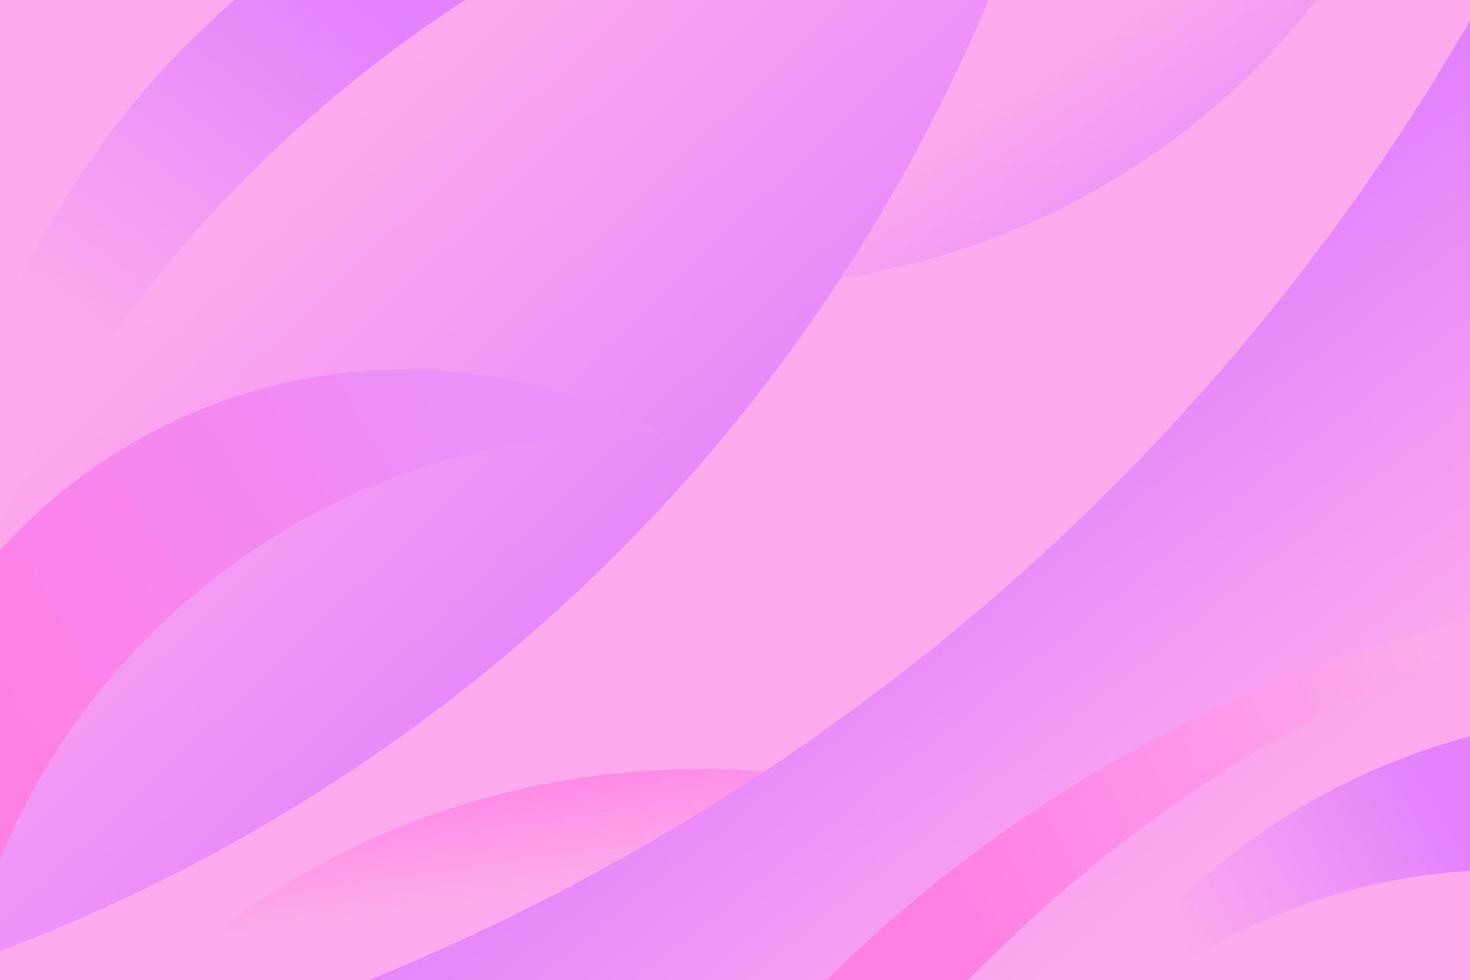 Light purple pastel gradient background with curved upward pattern vector